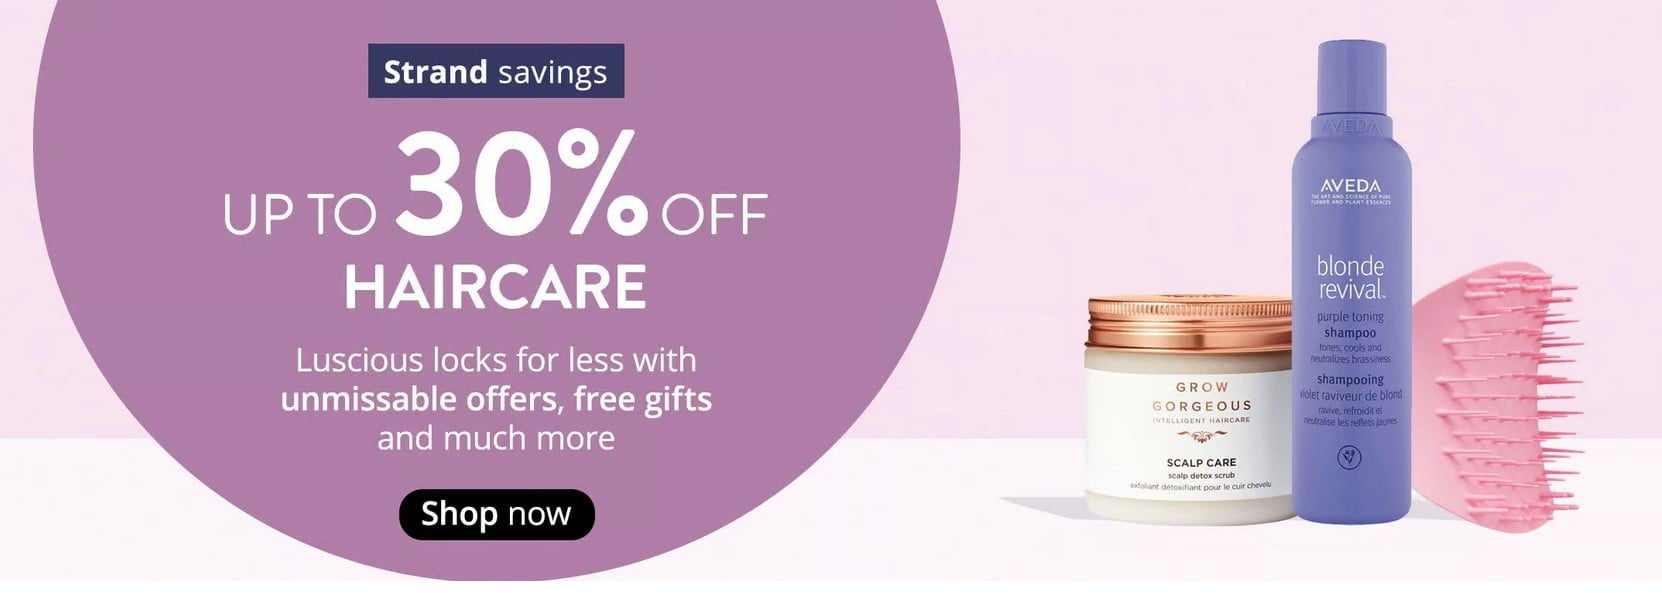 Hair Event at Sephora UK: Up to 30% off